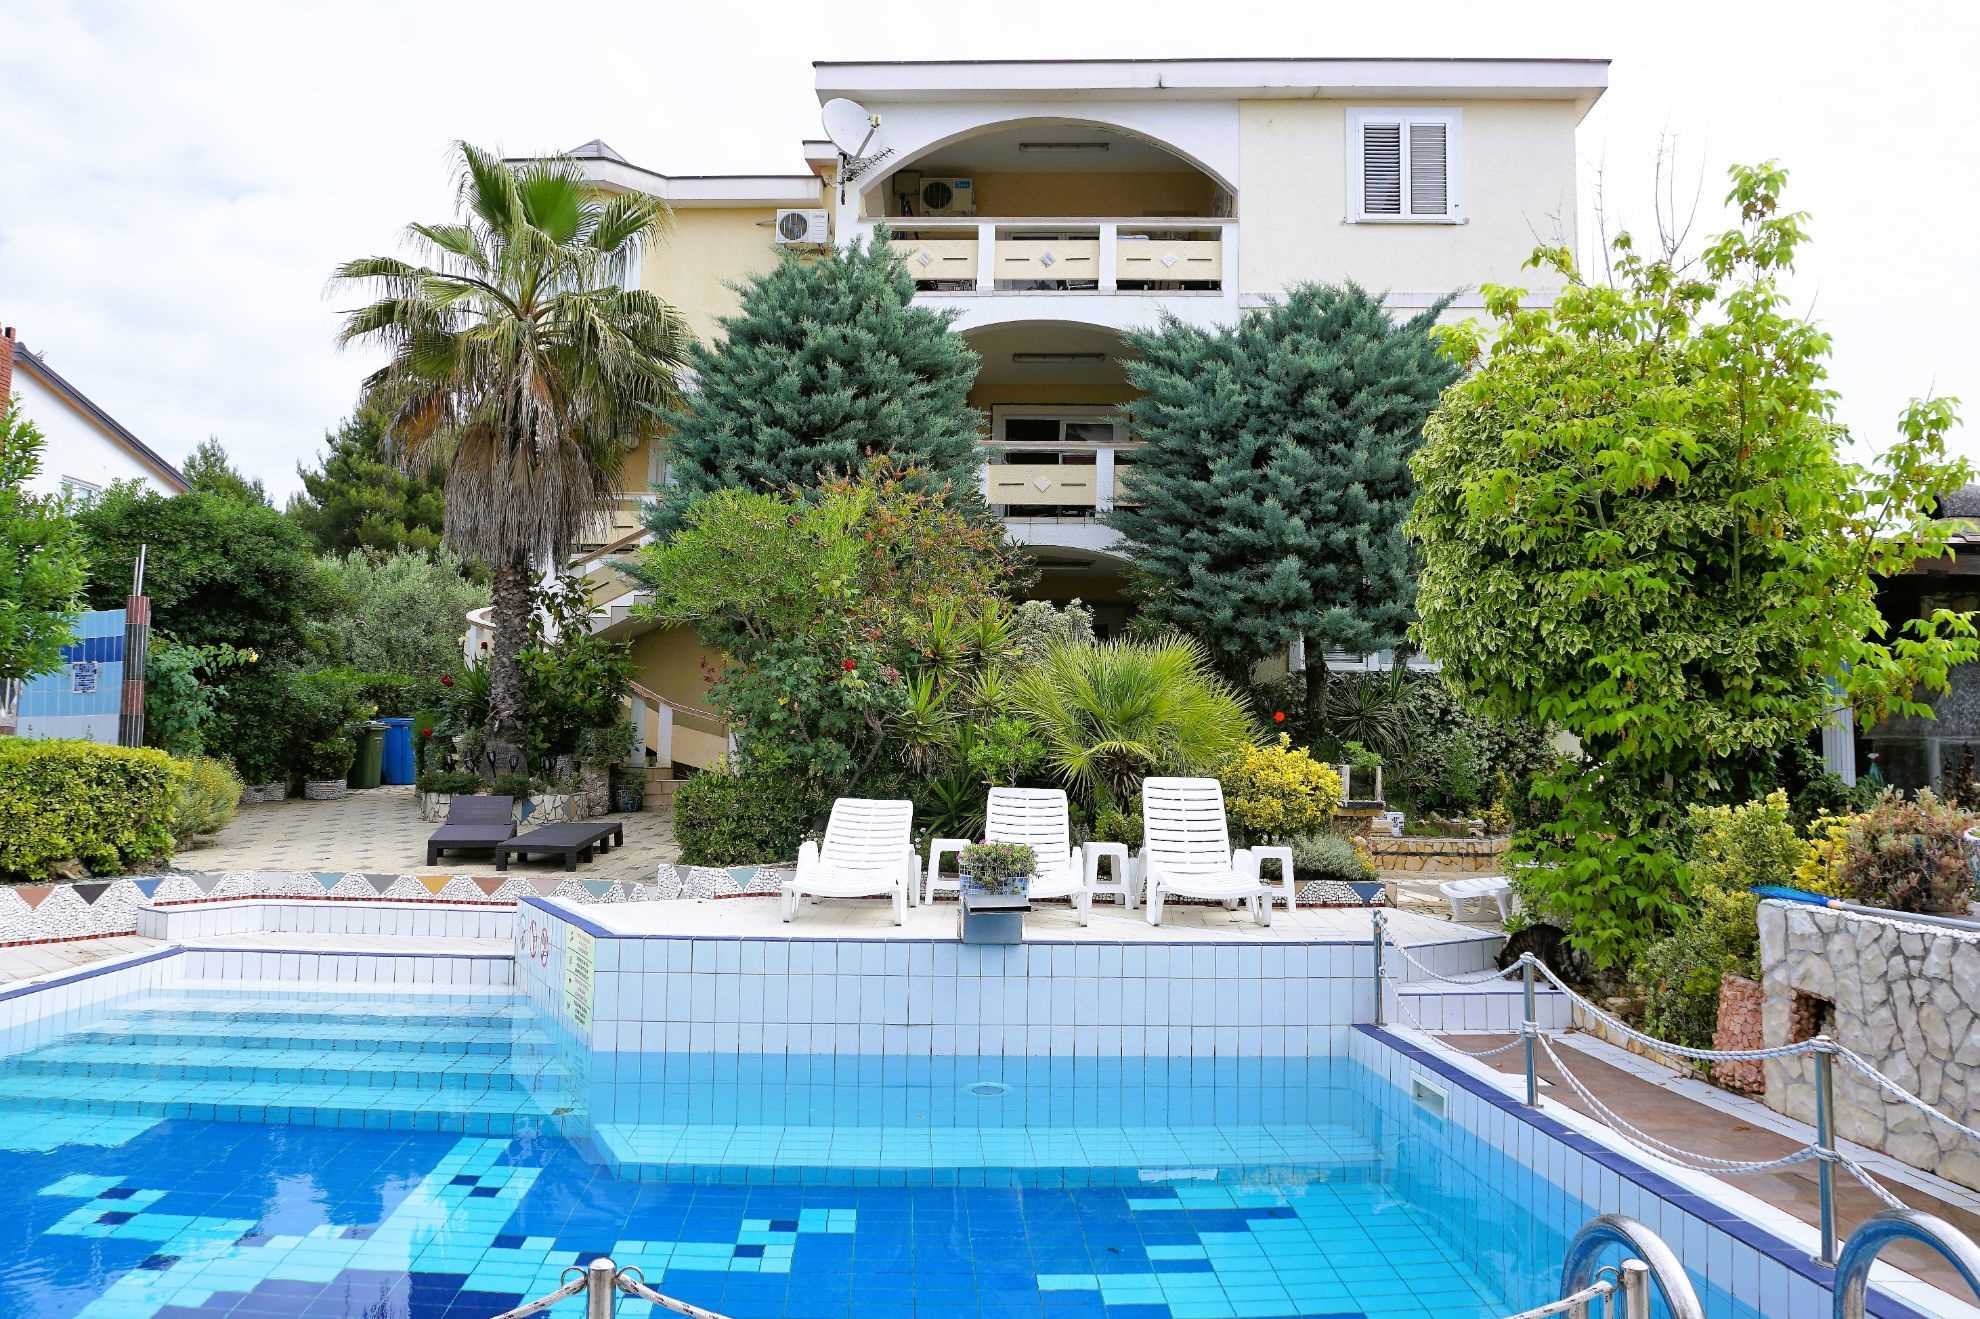 Apartment Tierra 1 with swimming pool